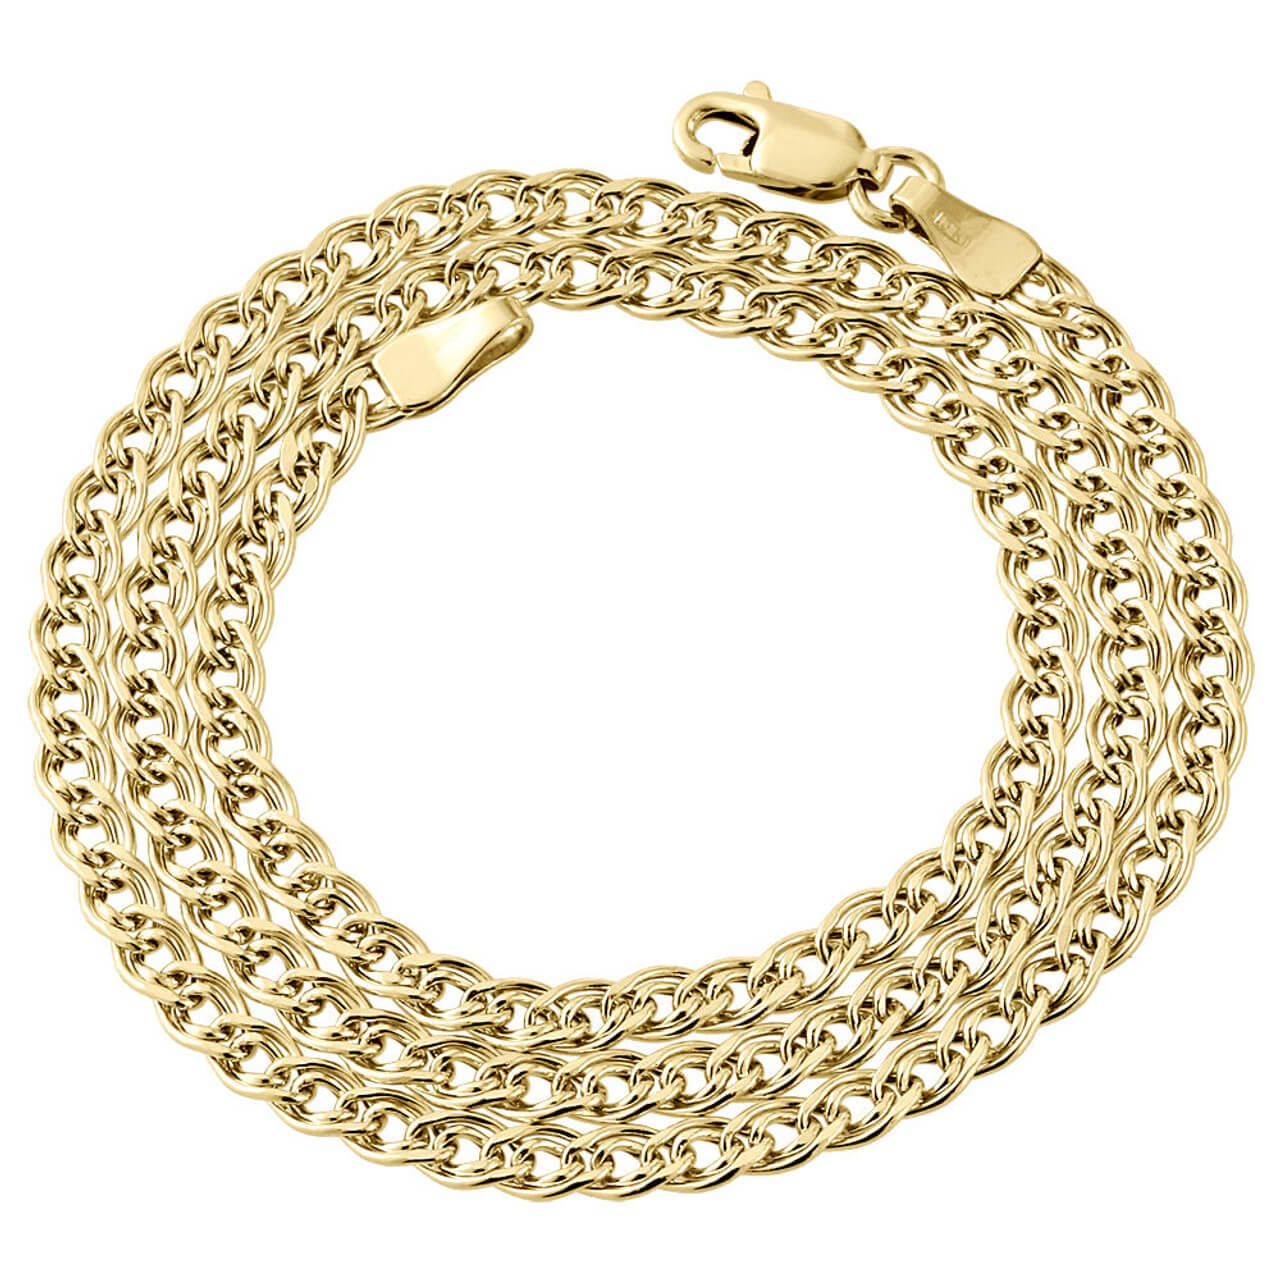 10K Yellow Gold 3.5mm Double Cuban Curb Italian Link Chain Necklace 16-26 Inches